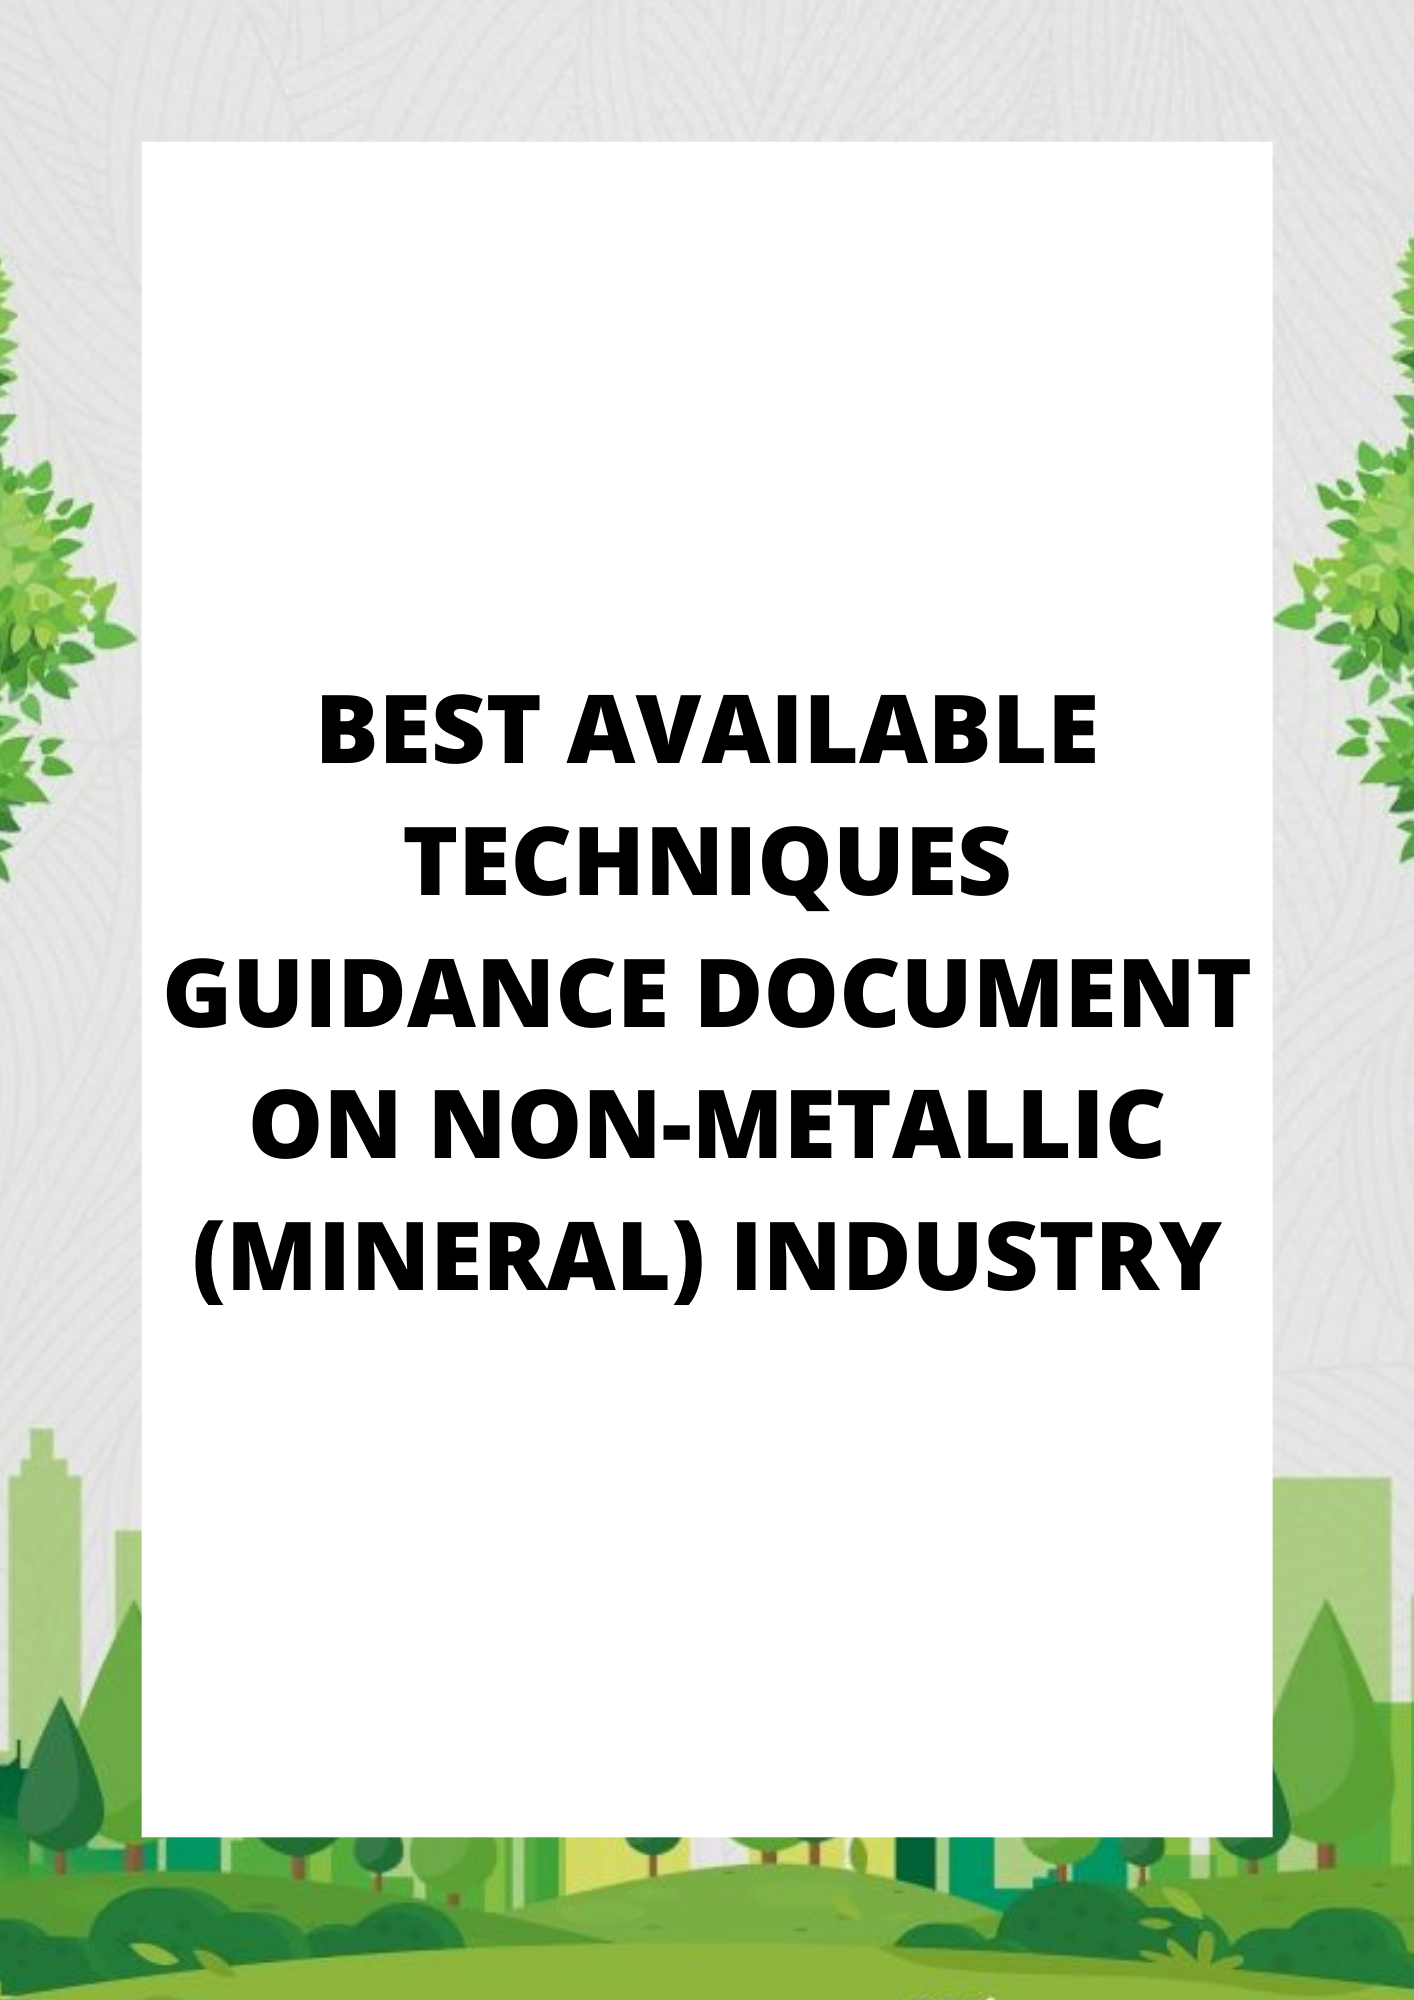 BEST AVAILABLE TECHNIQUES GUIDANCE DOCUMENT ON NON-METALLIC (MINERAL) INDUSTRY